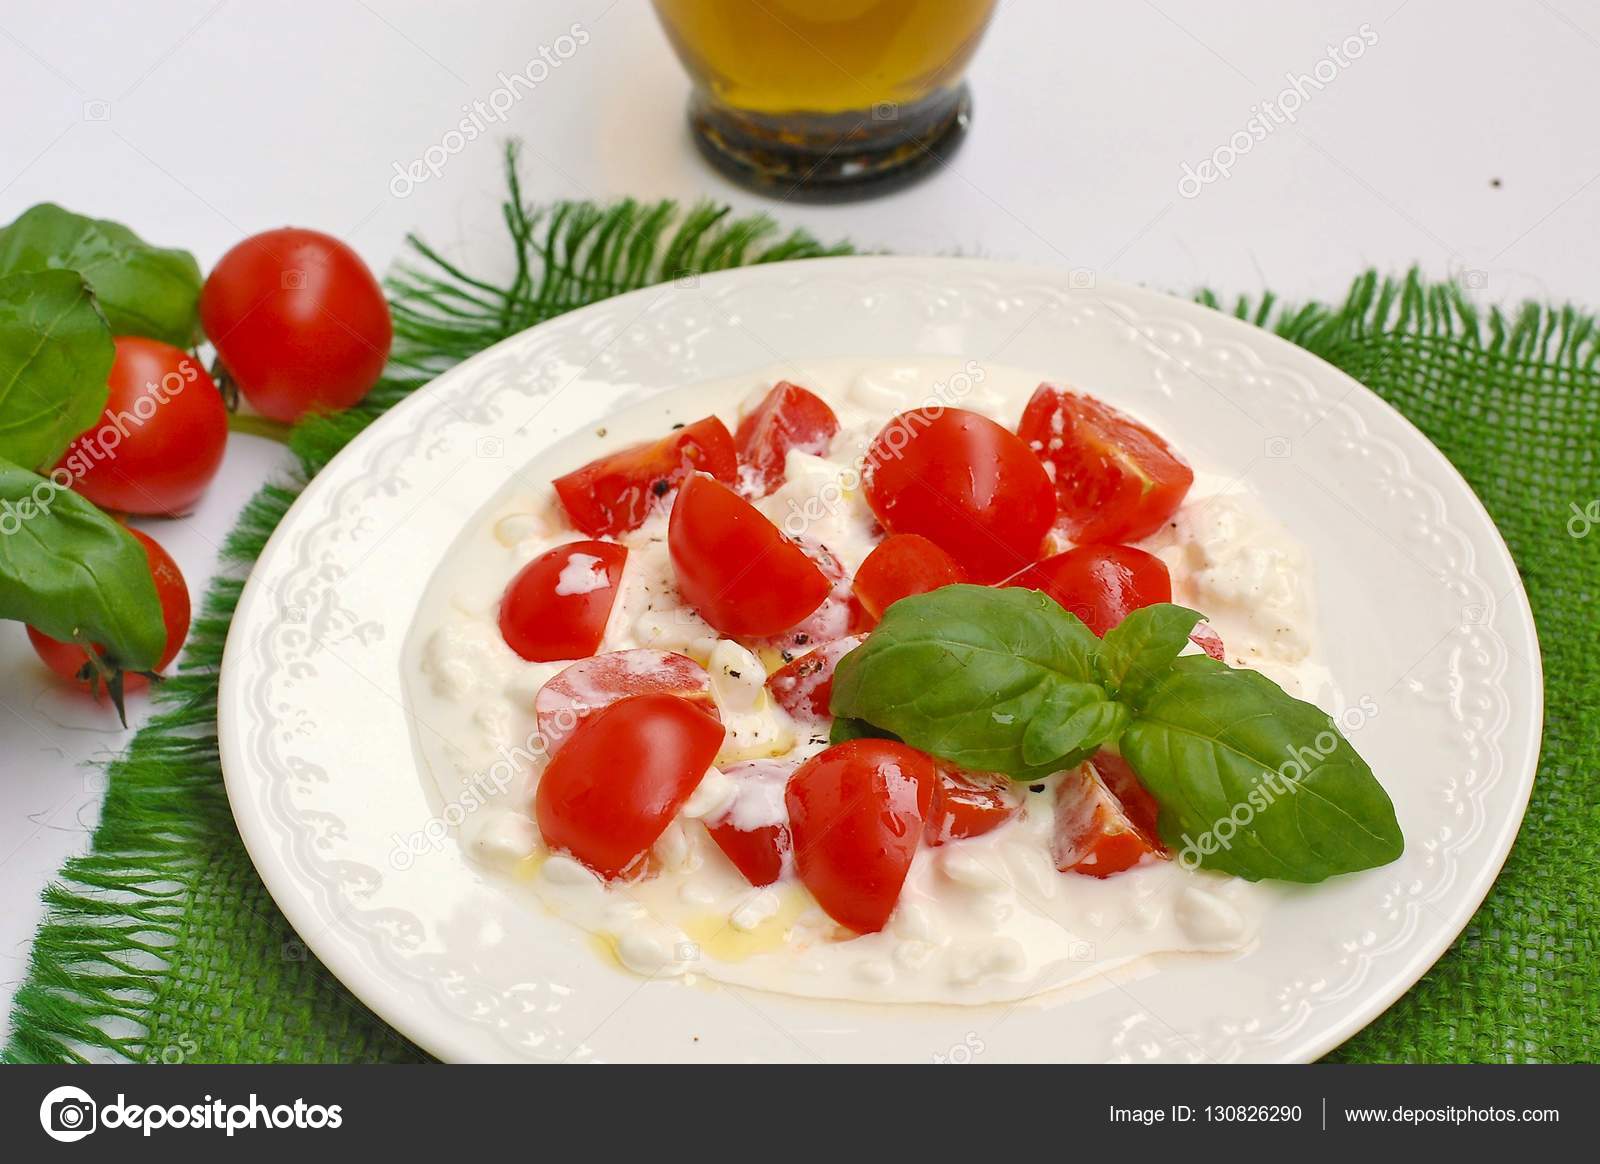 Salad From Cherry Tomatoes And Cottage Cheese With Basil And Olive